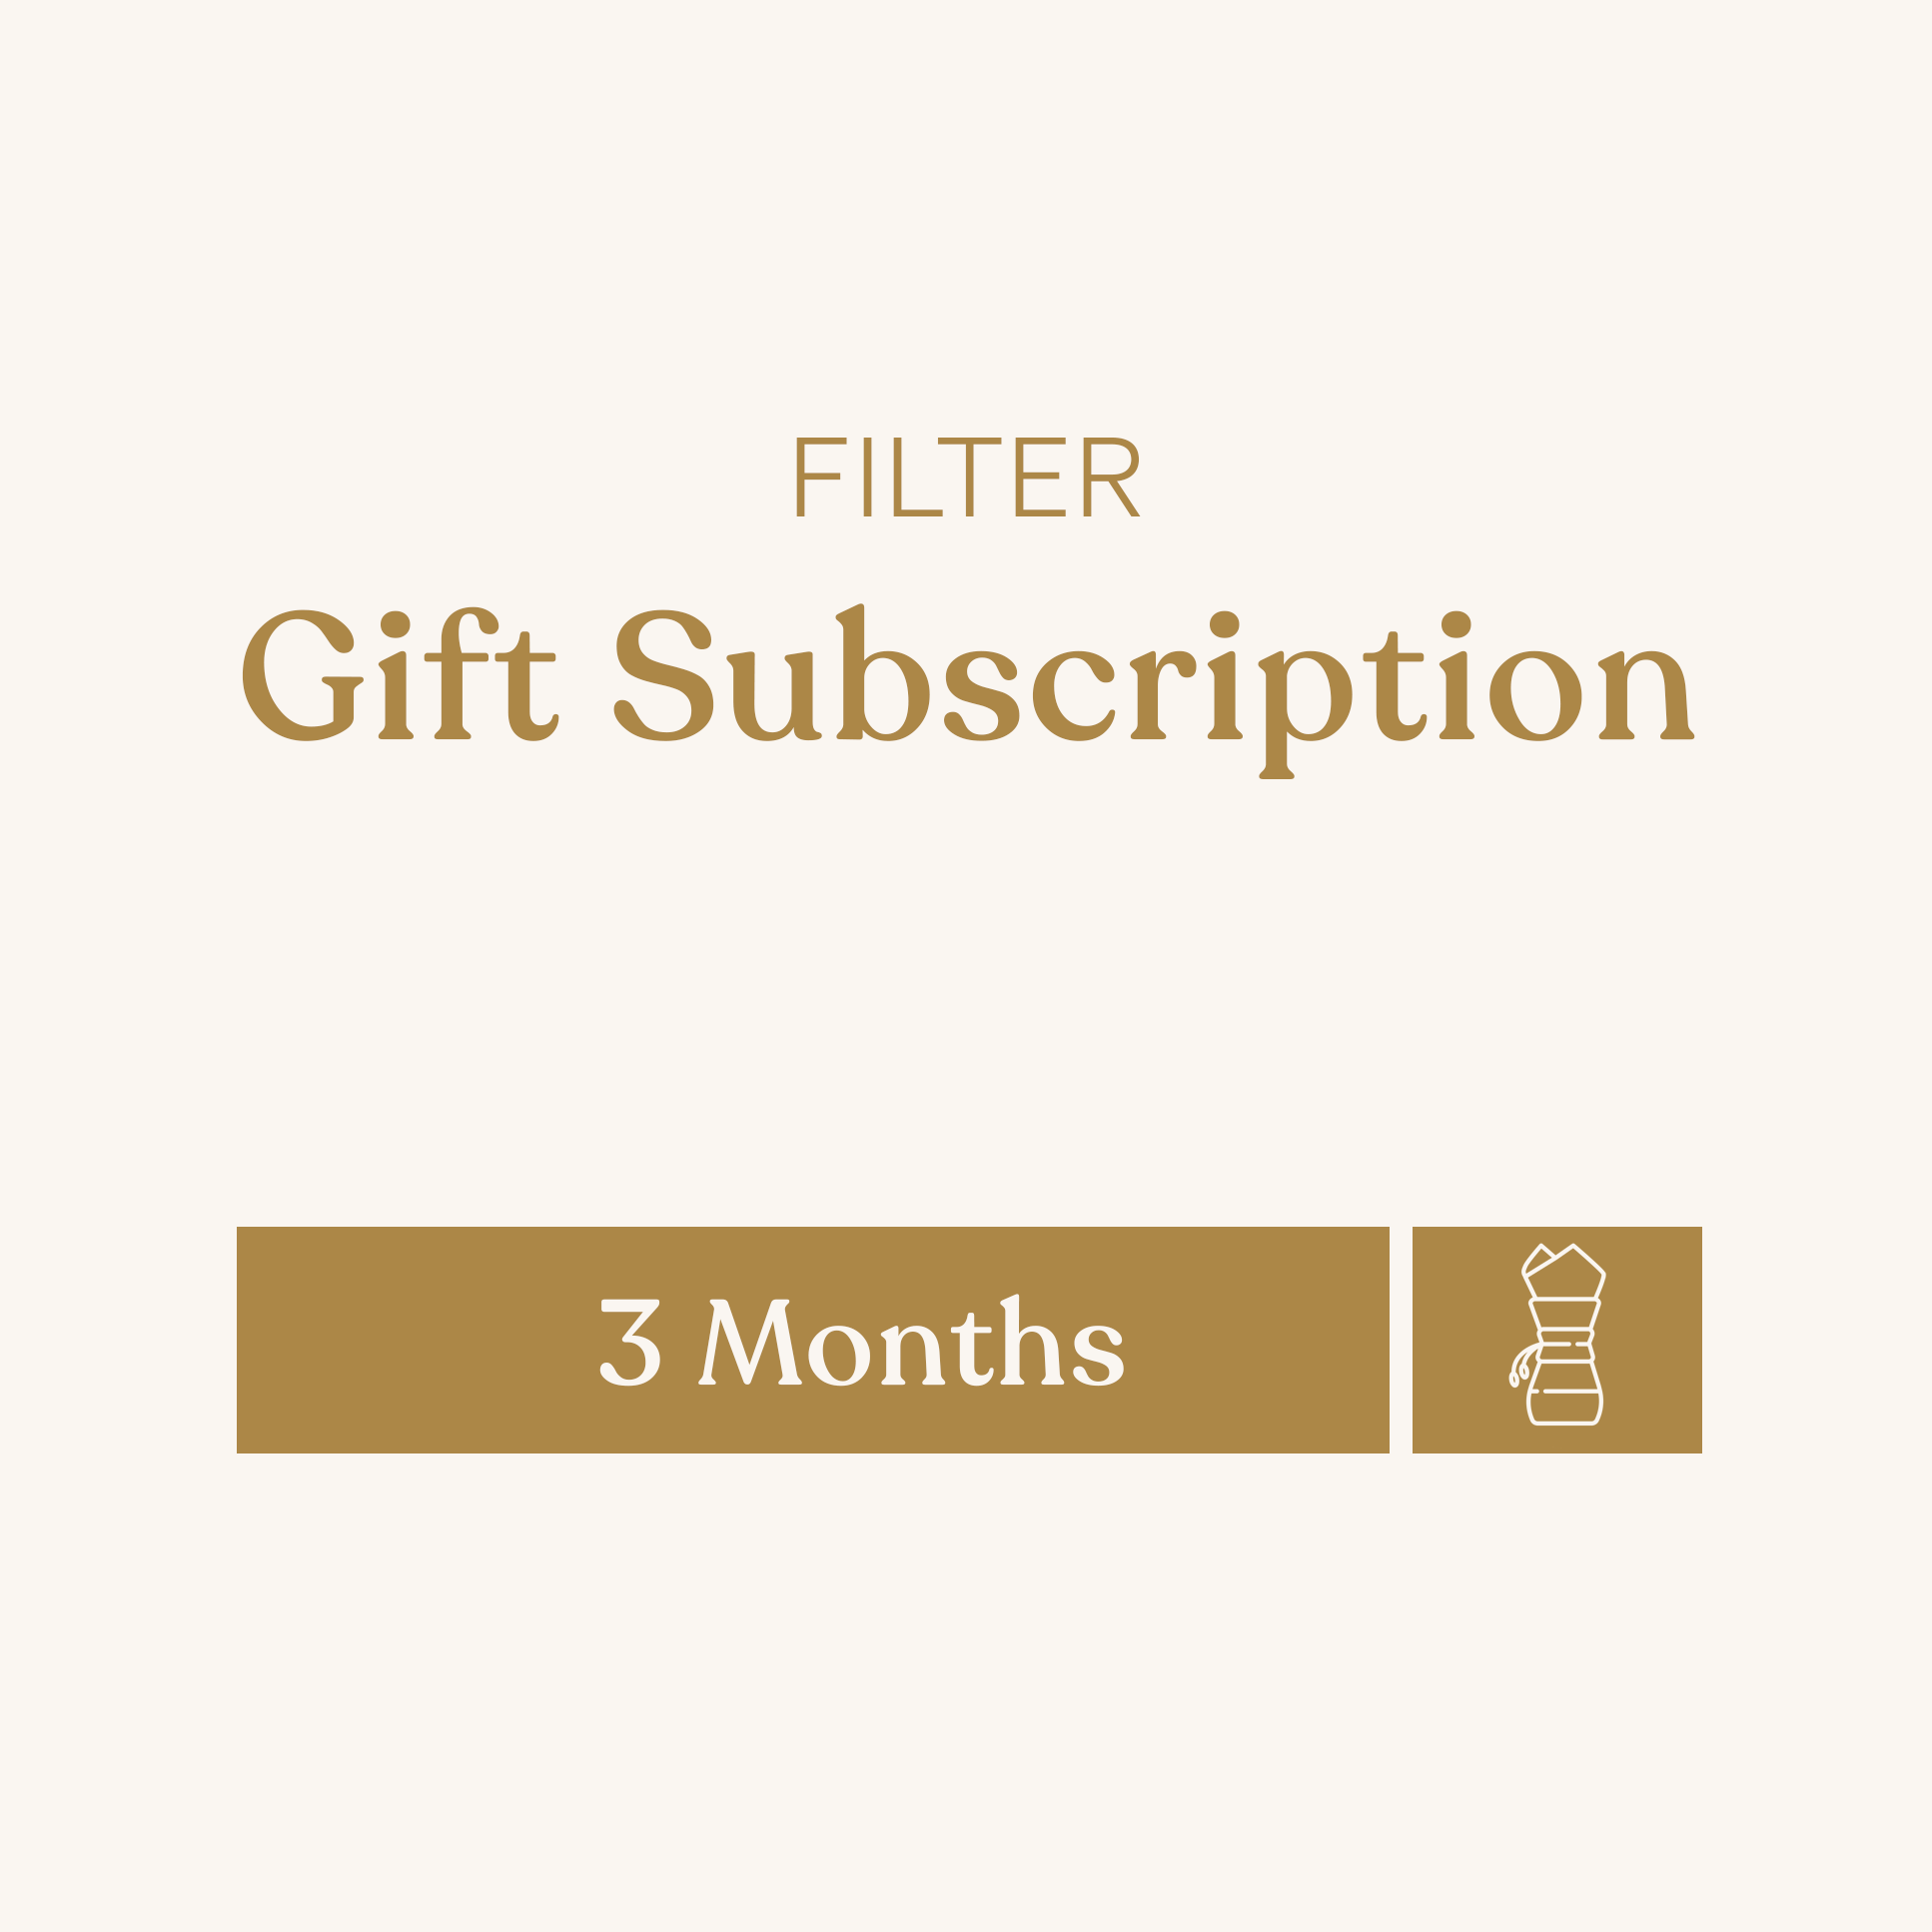 3 Months Filter Gift Subscription